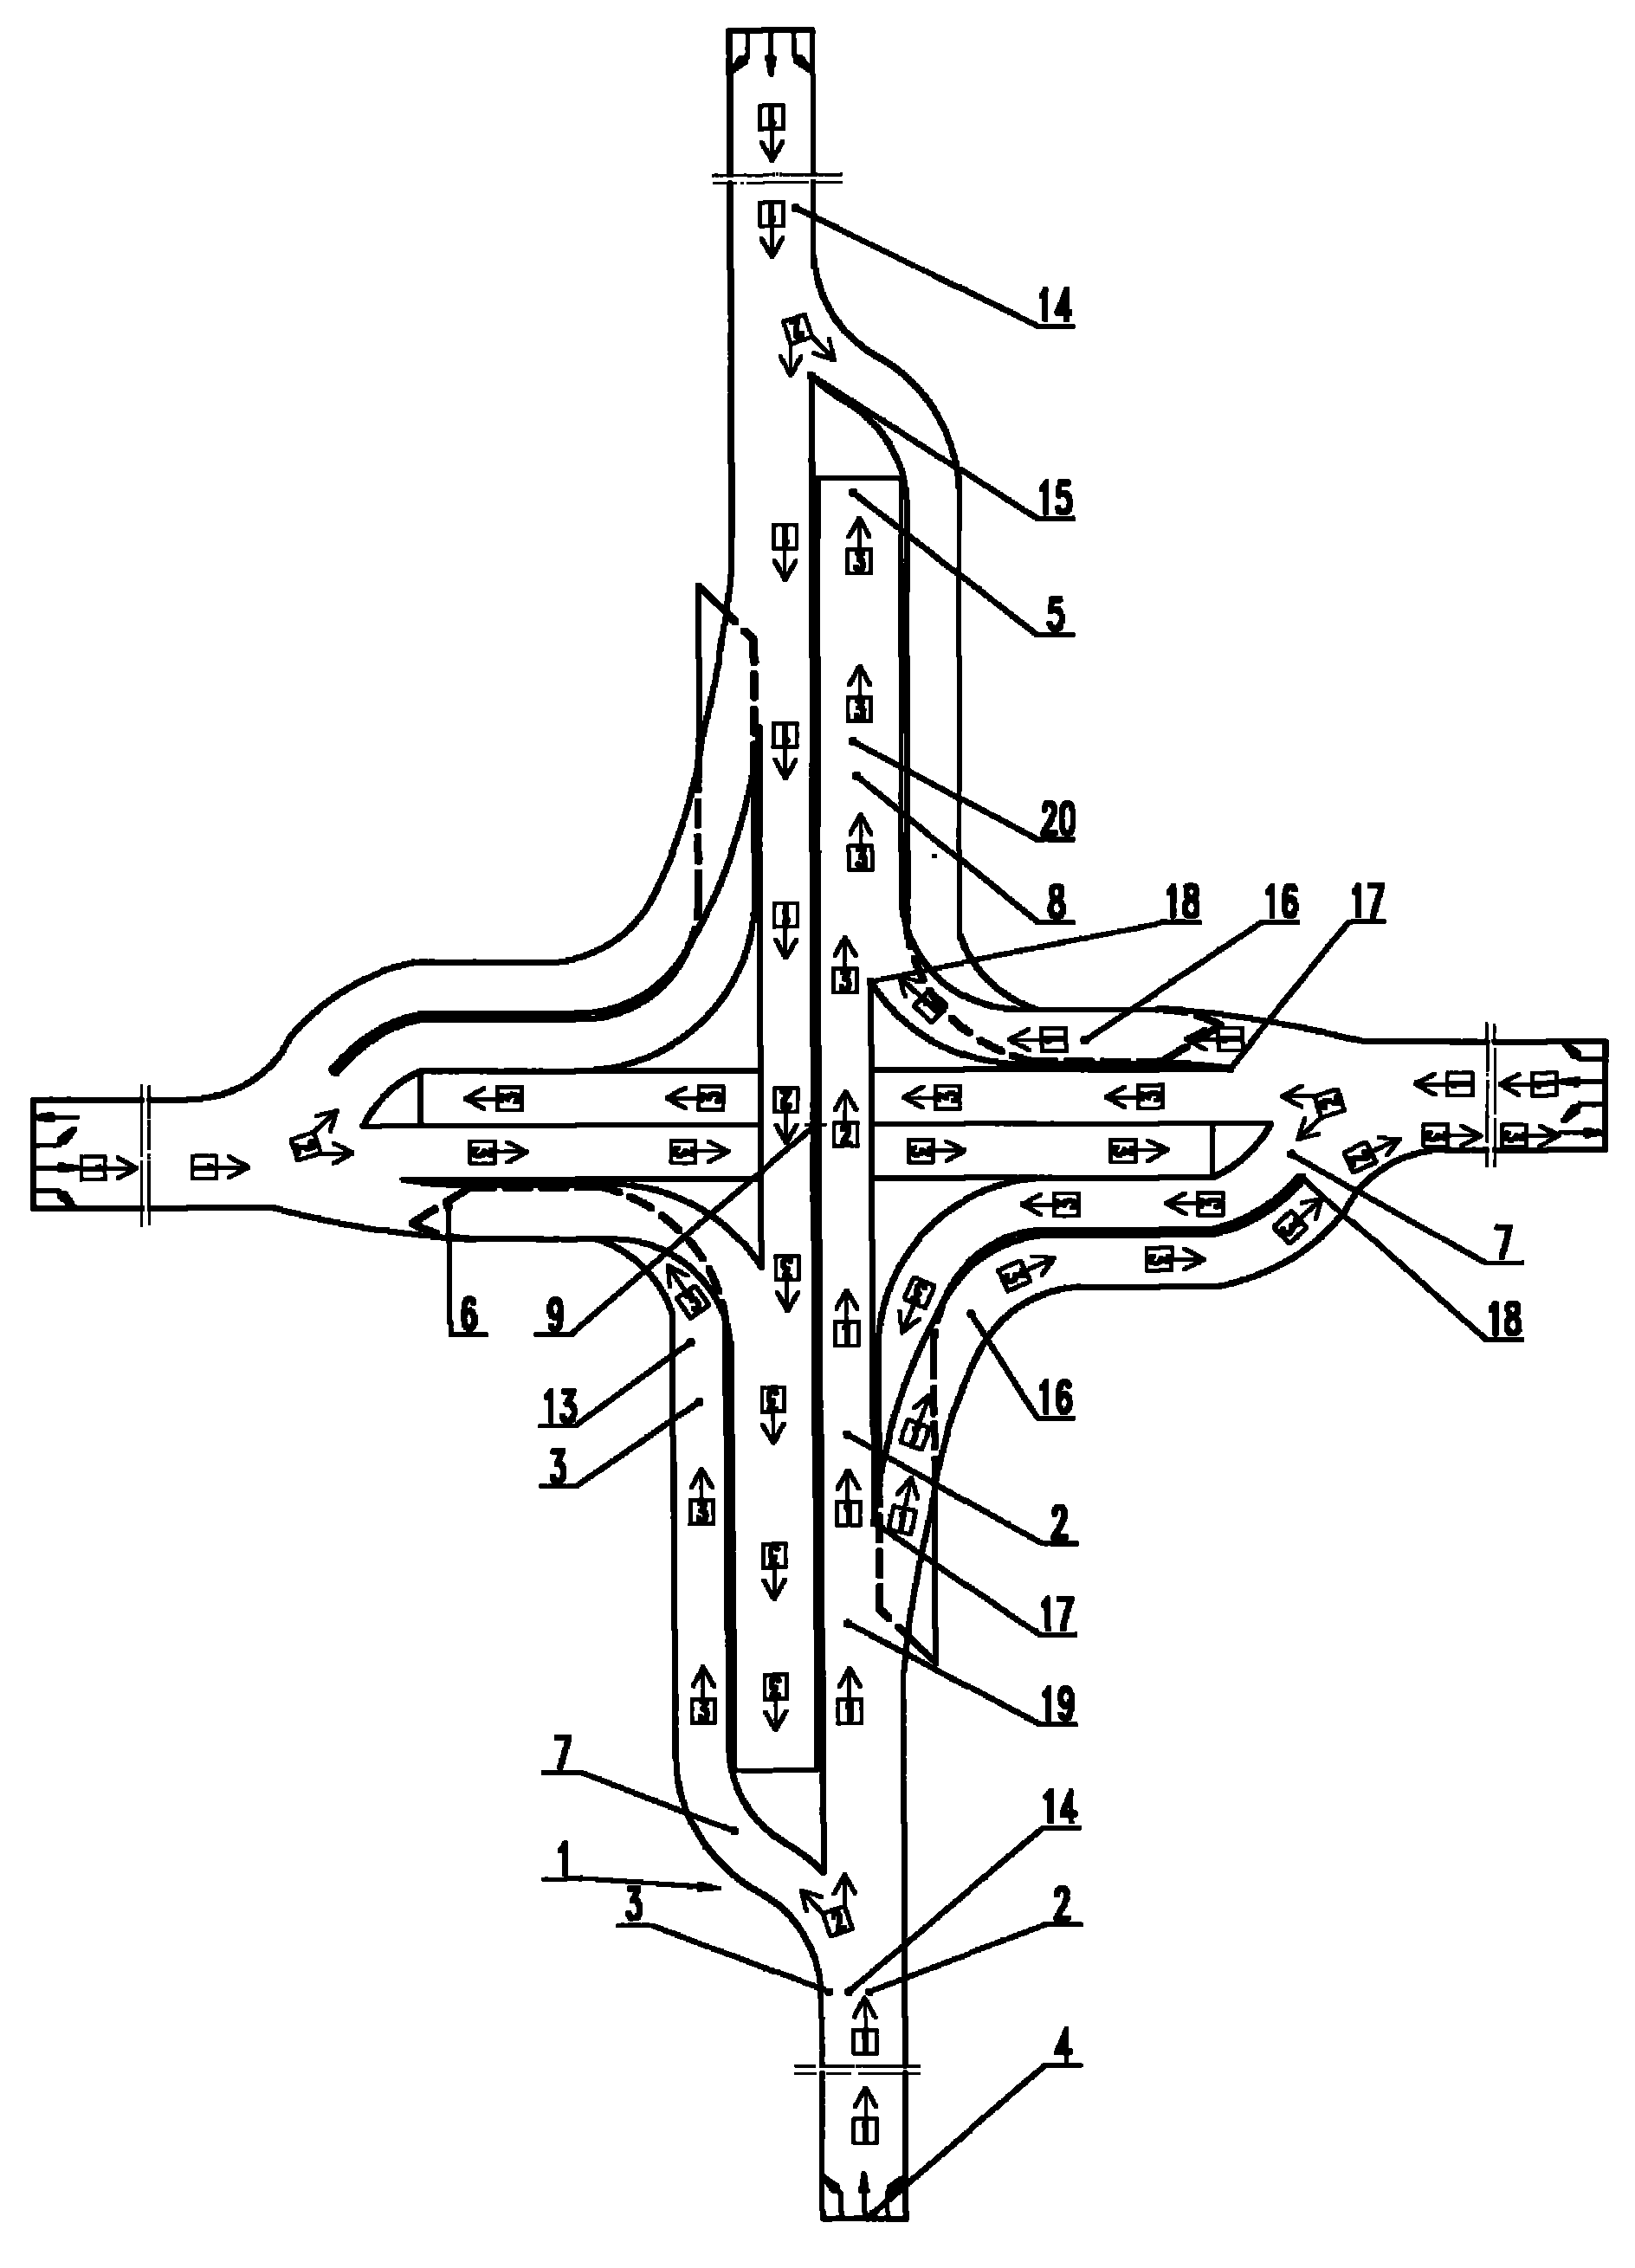 Two kinds of right-turning bridges at the crossroads full-flow cross-shaped composite bridge